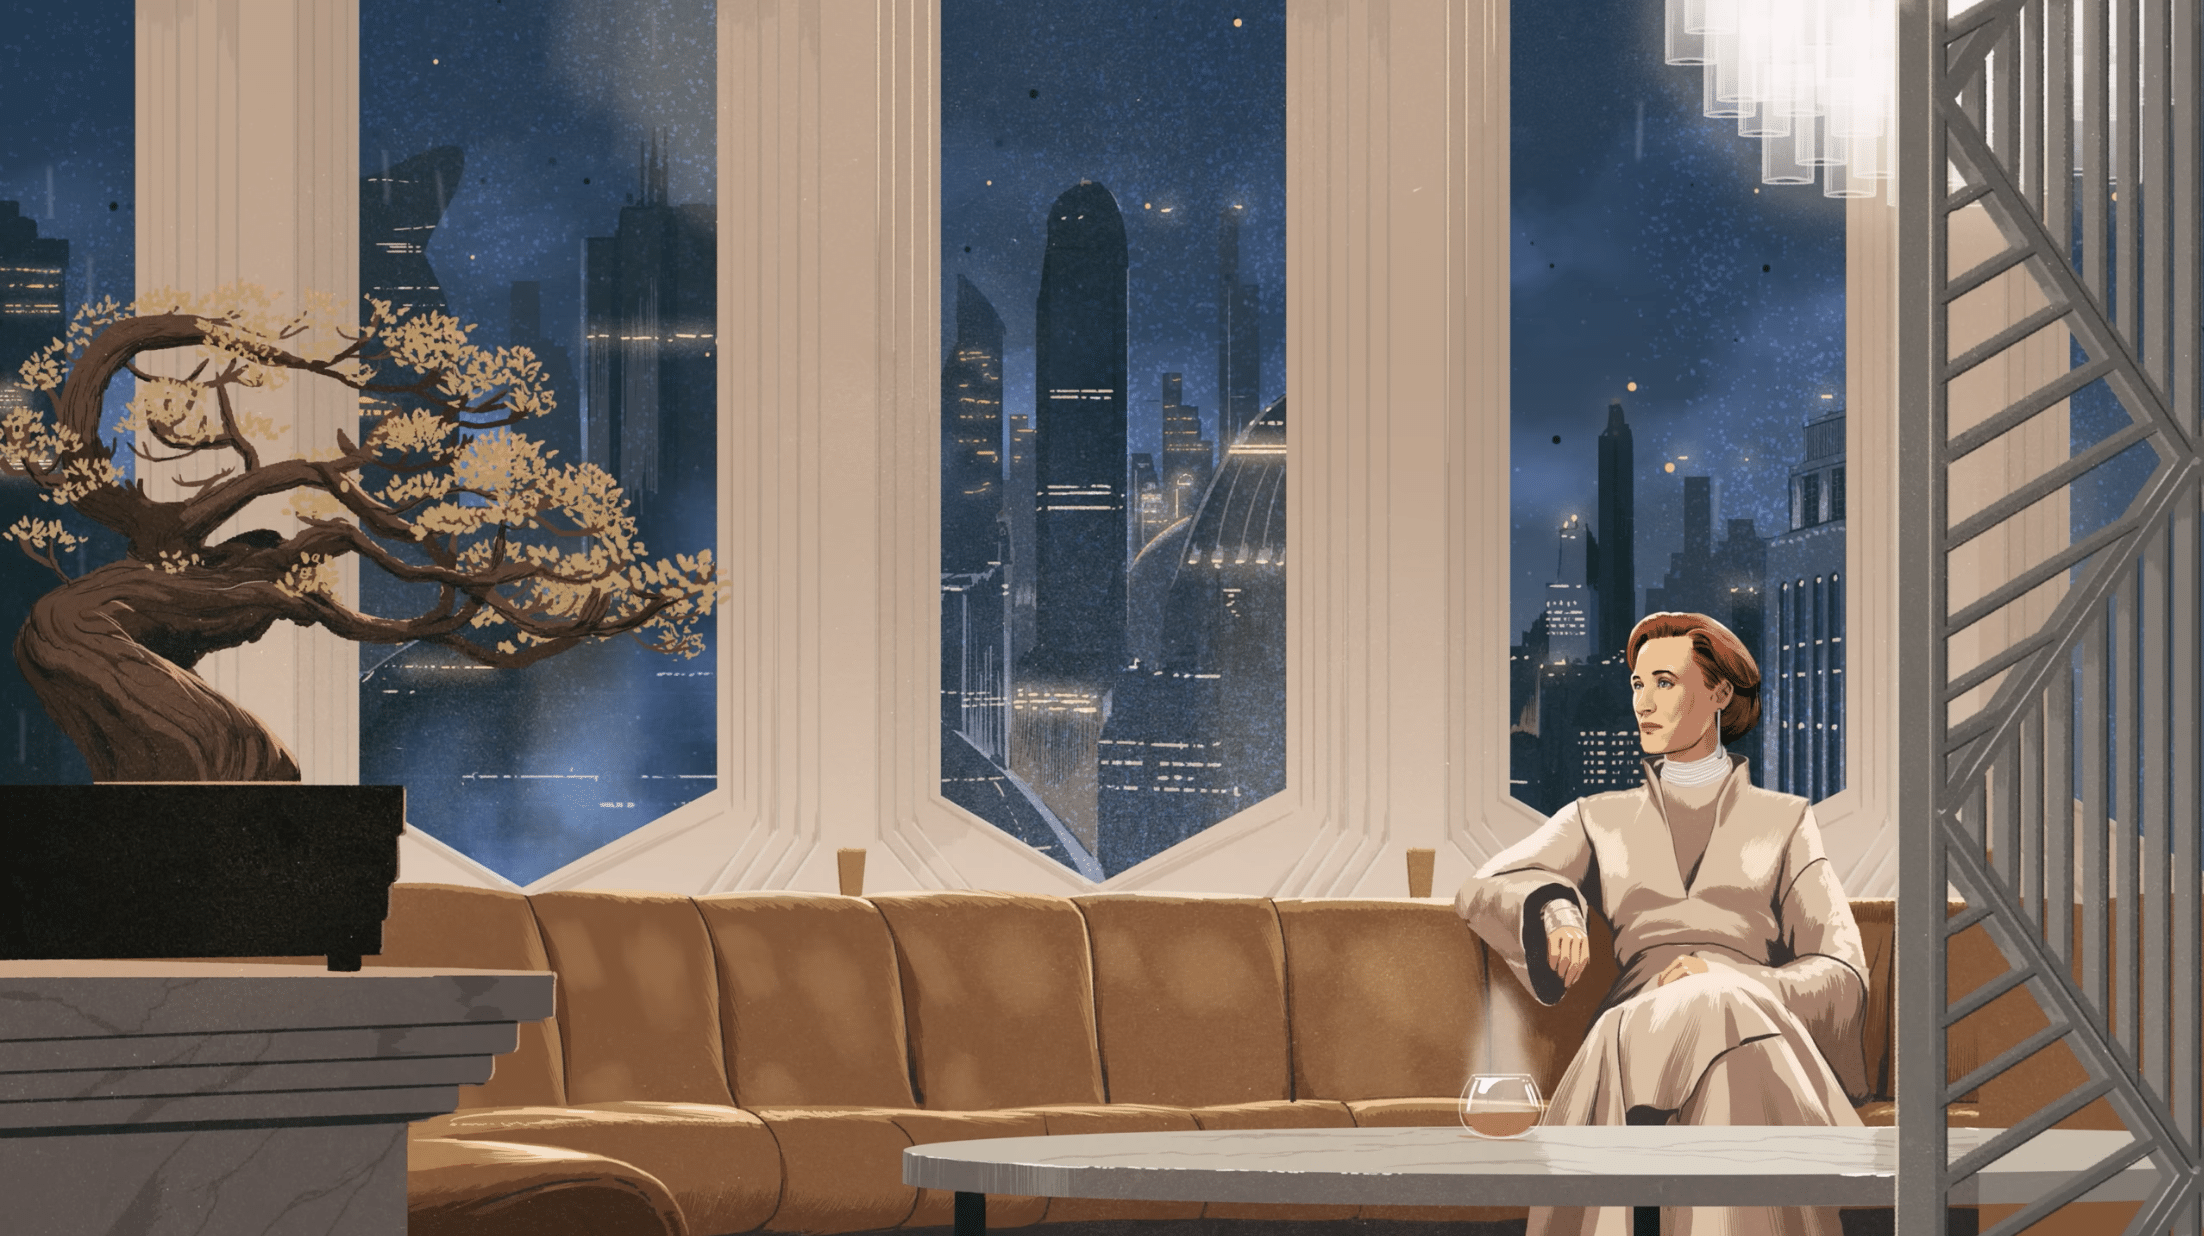 A Quiet Moment with Mon Mothma